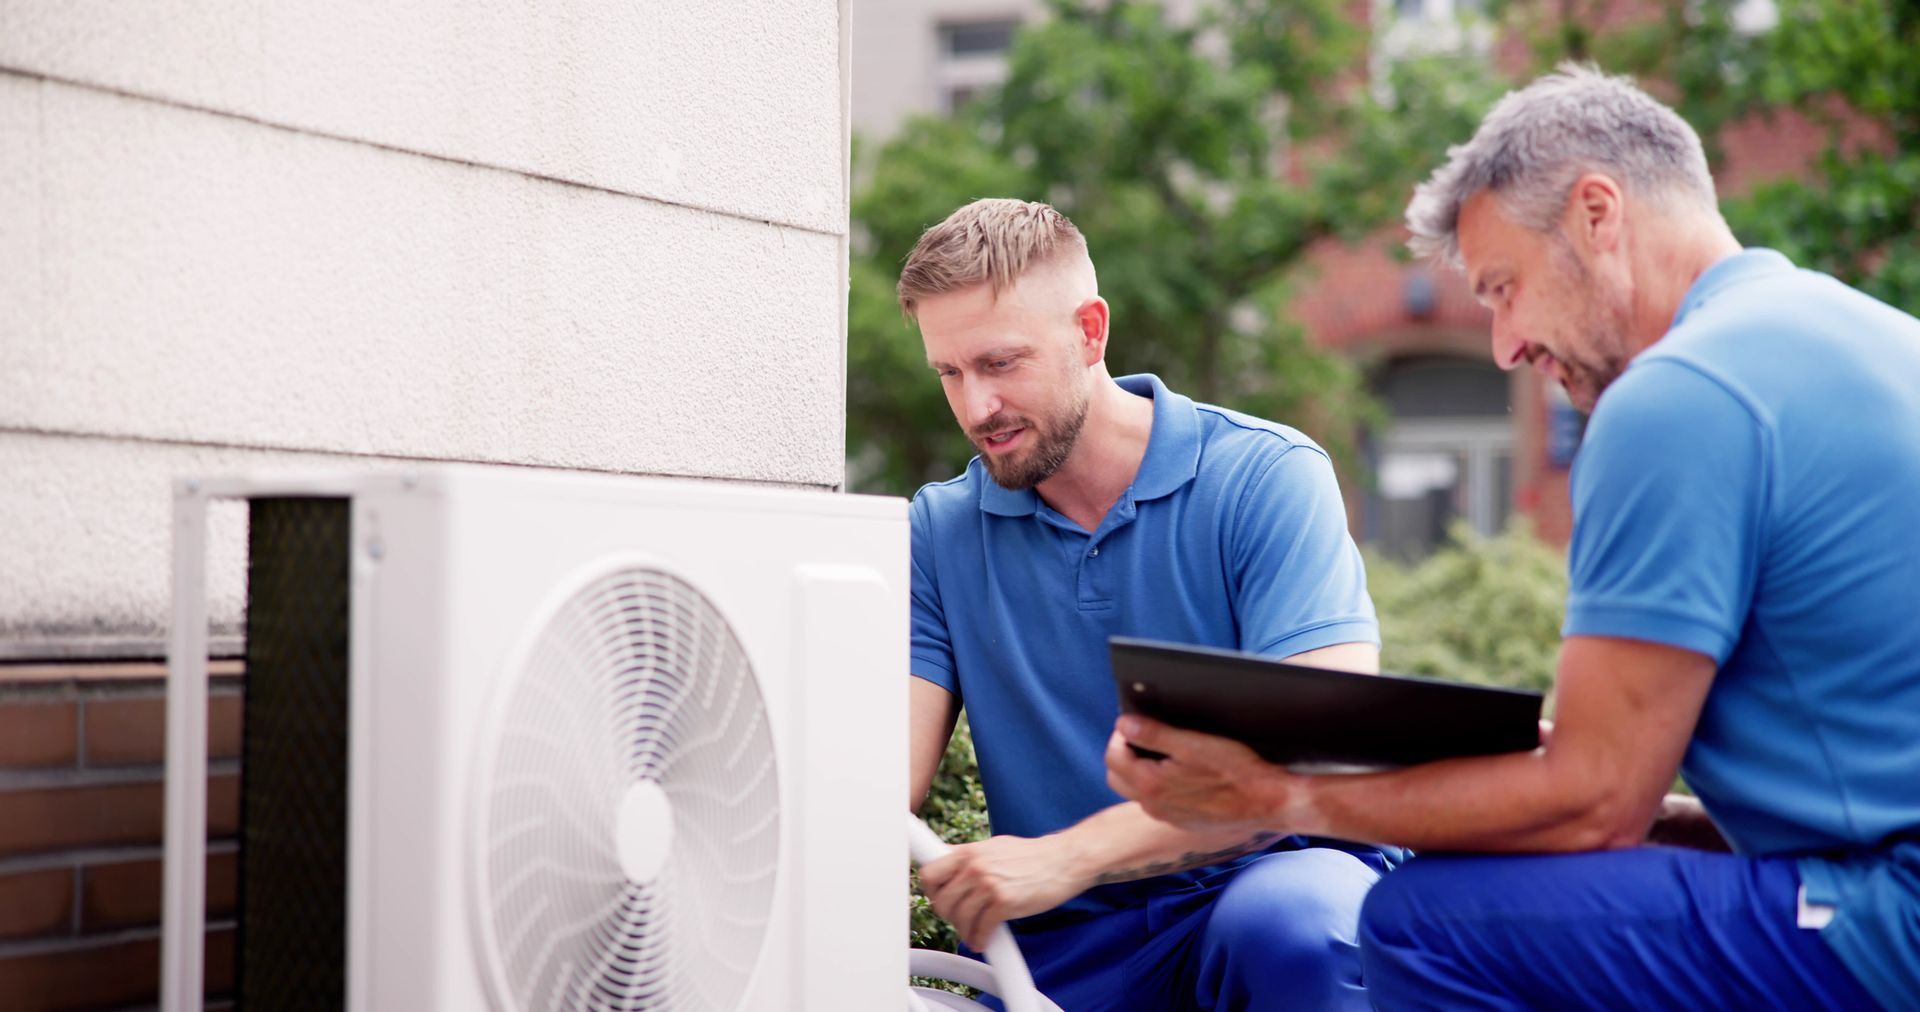 Ocean Air Cooling technicians installing AC unit outside.